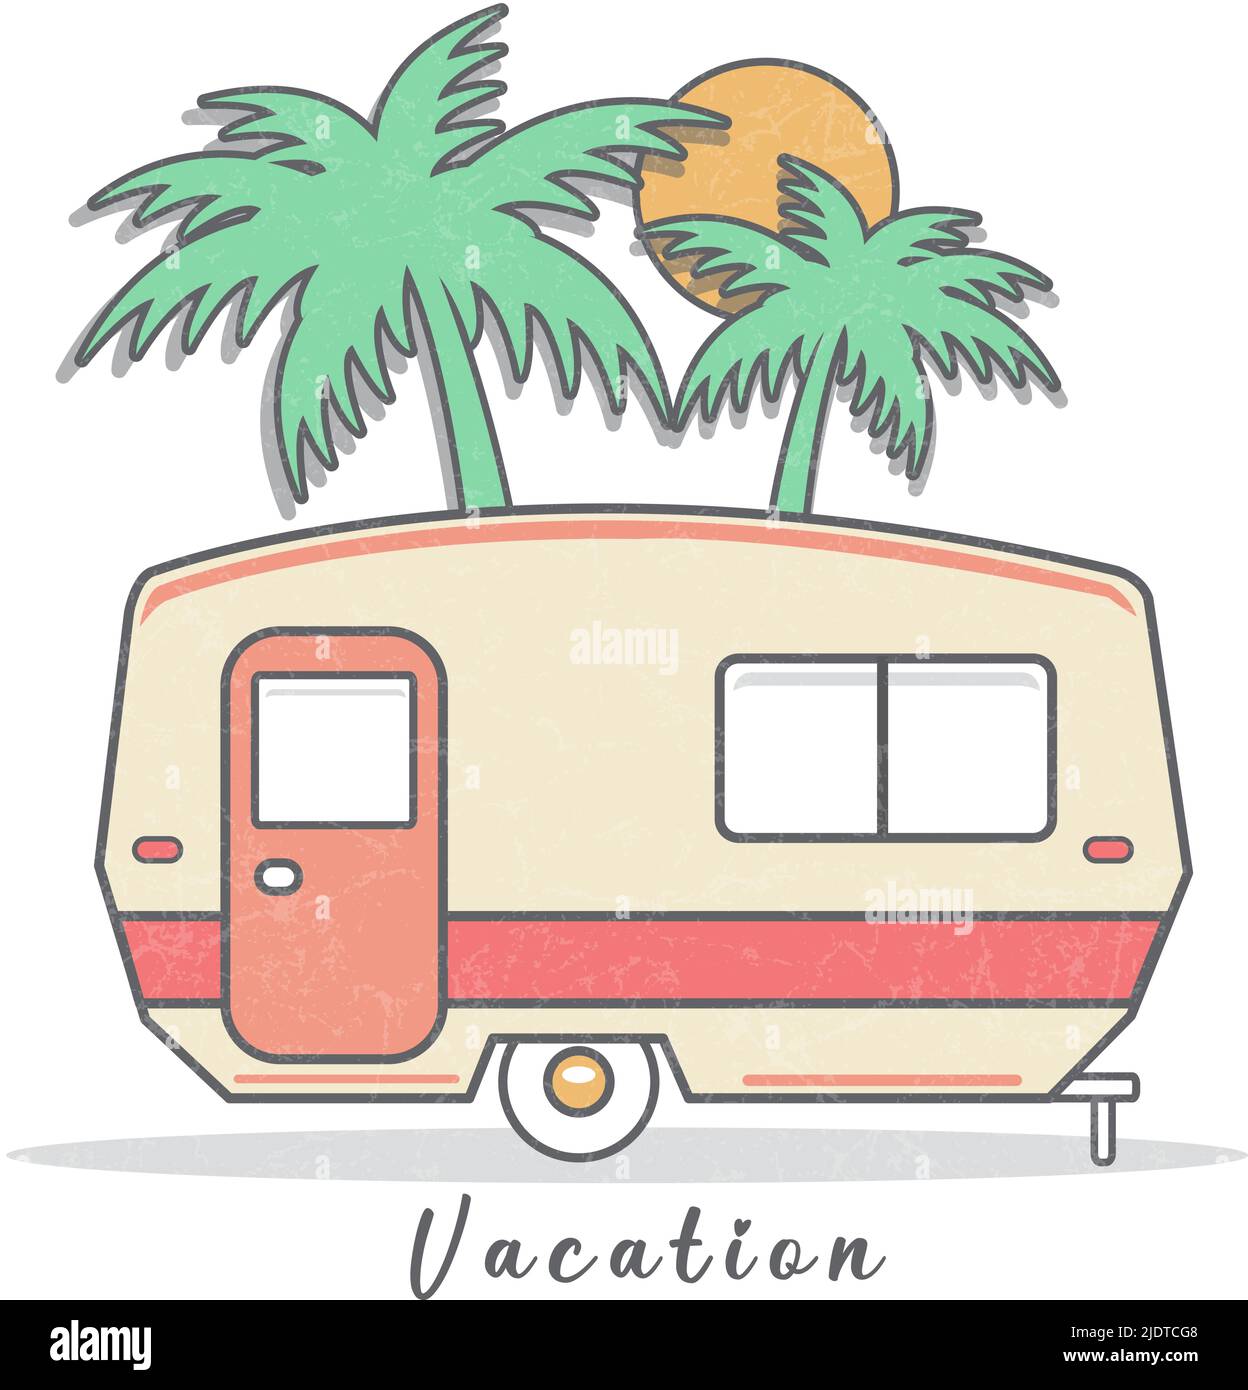 Camping trailer caravan and palmtrees vintage  retro design illustration vector with grunge texture Stock Vector